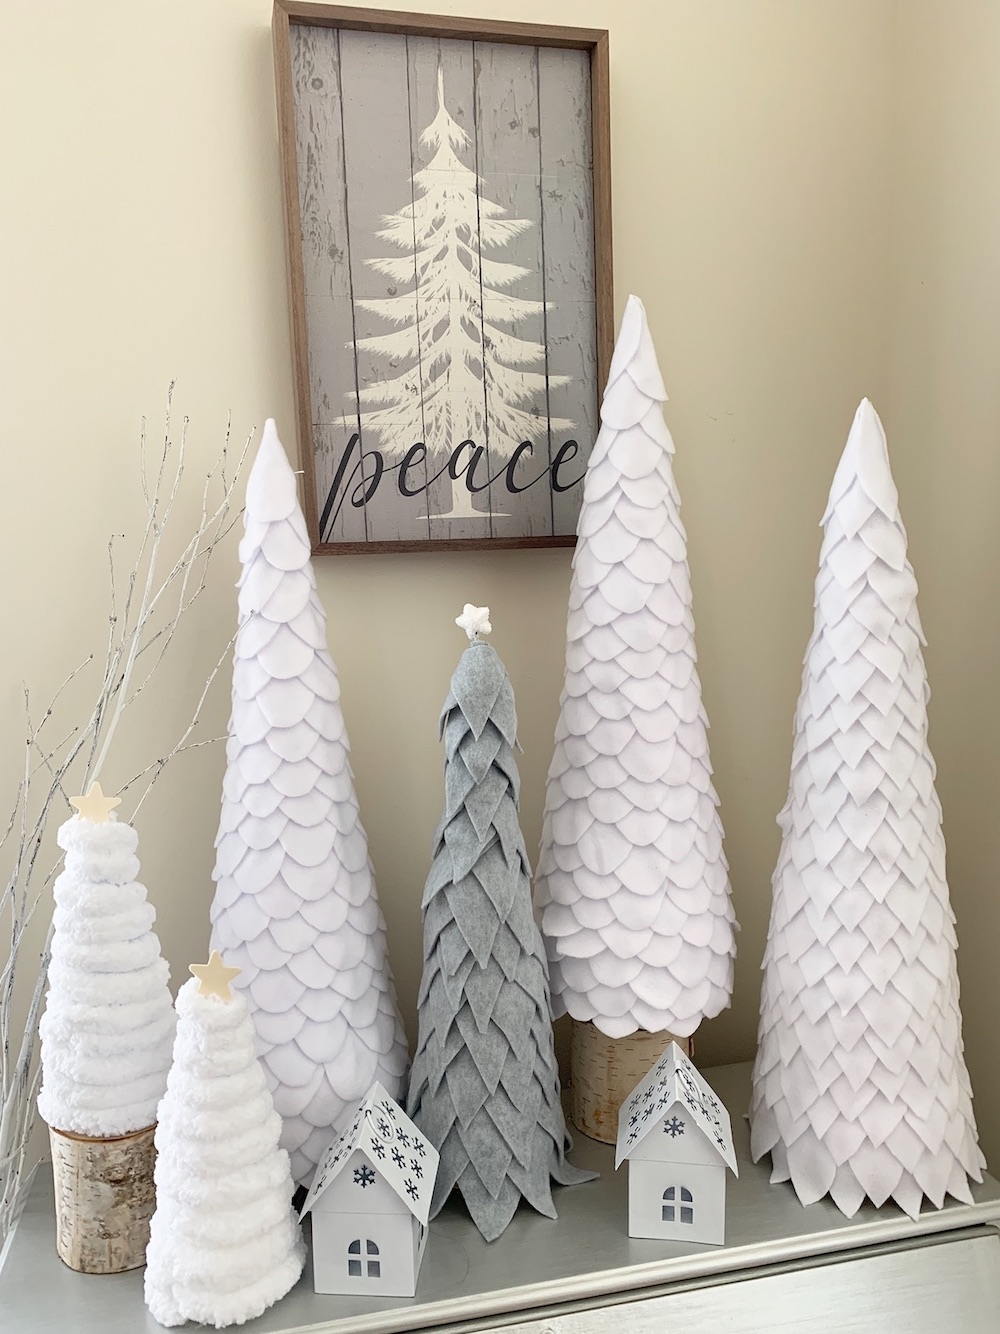 How to Make a Round Leaf Christmas Tree From Felt